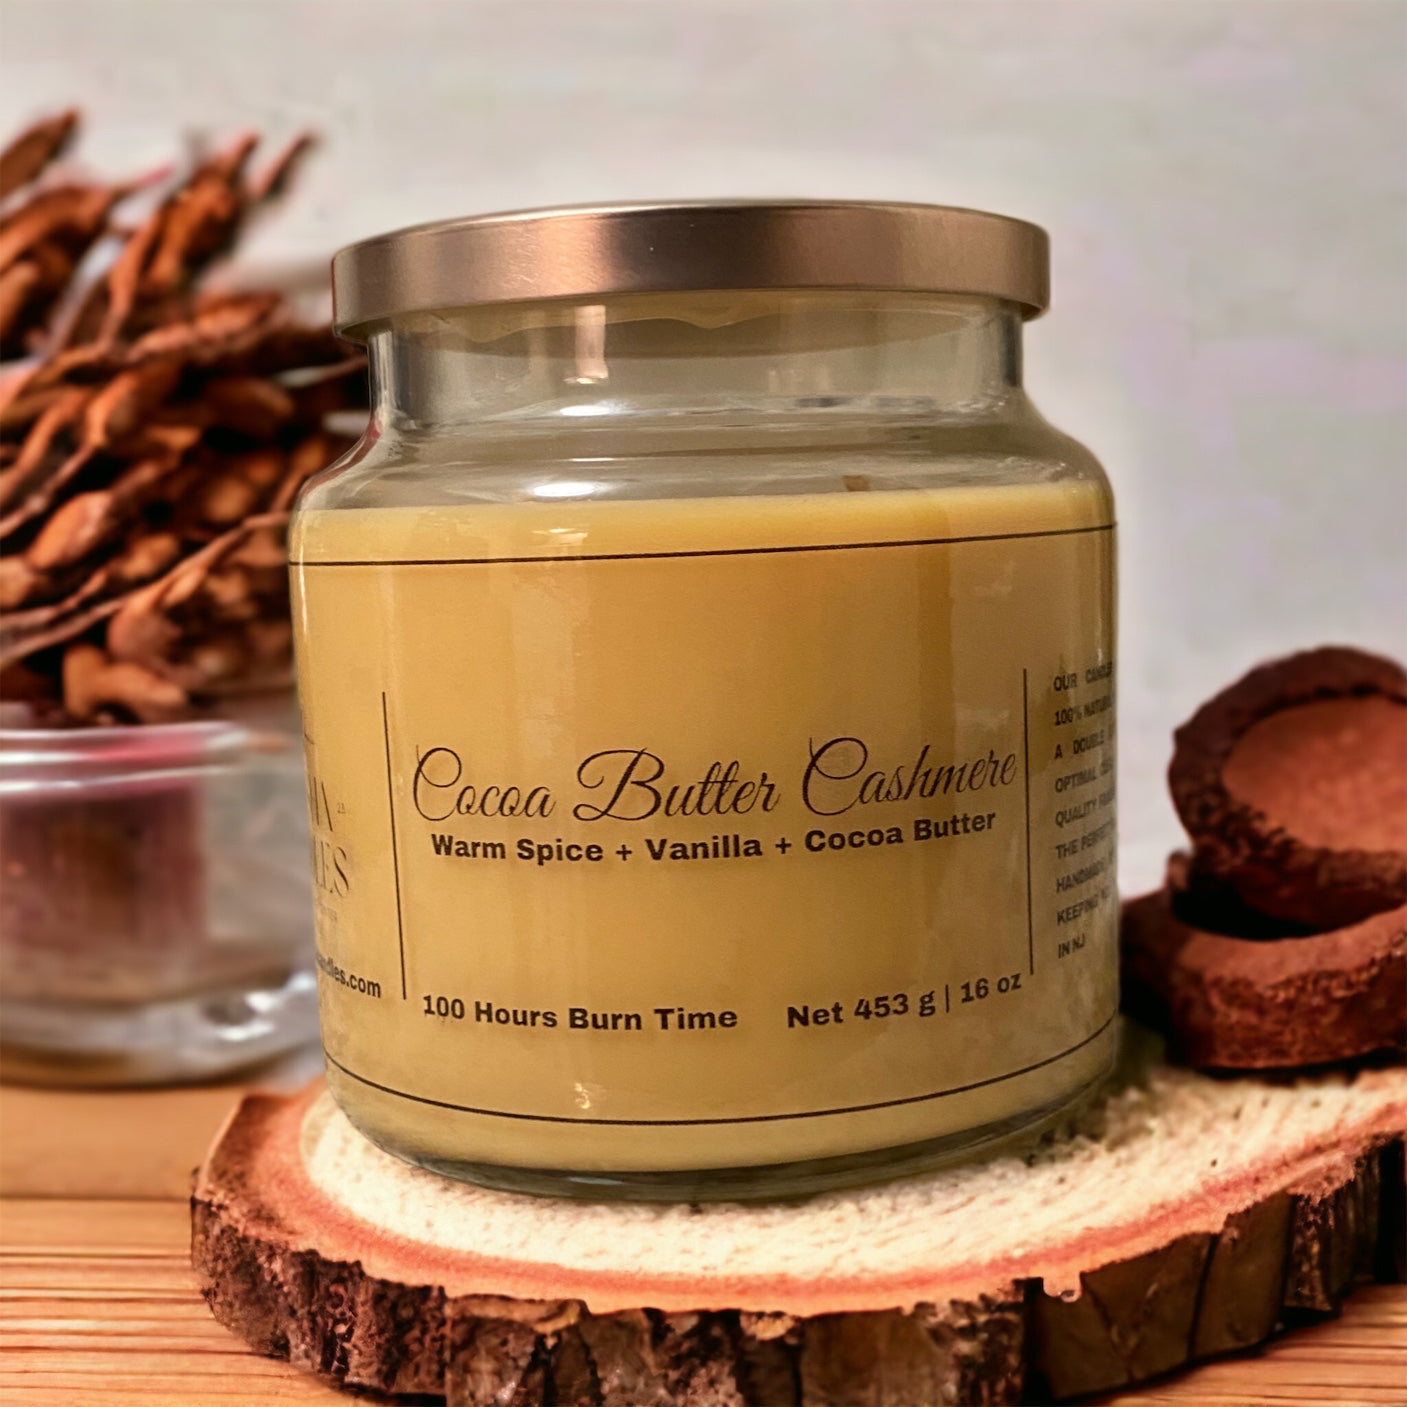 Handcrafted Cocoa Butter Cashmere Candles | Natural Soy Wax | Aromatherapy Candle for Relaxation and Stress Relief